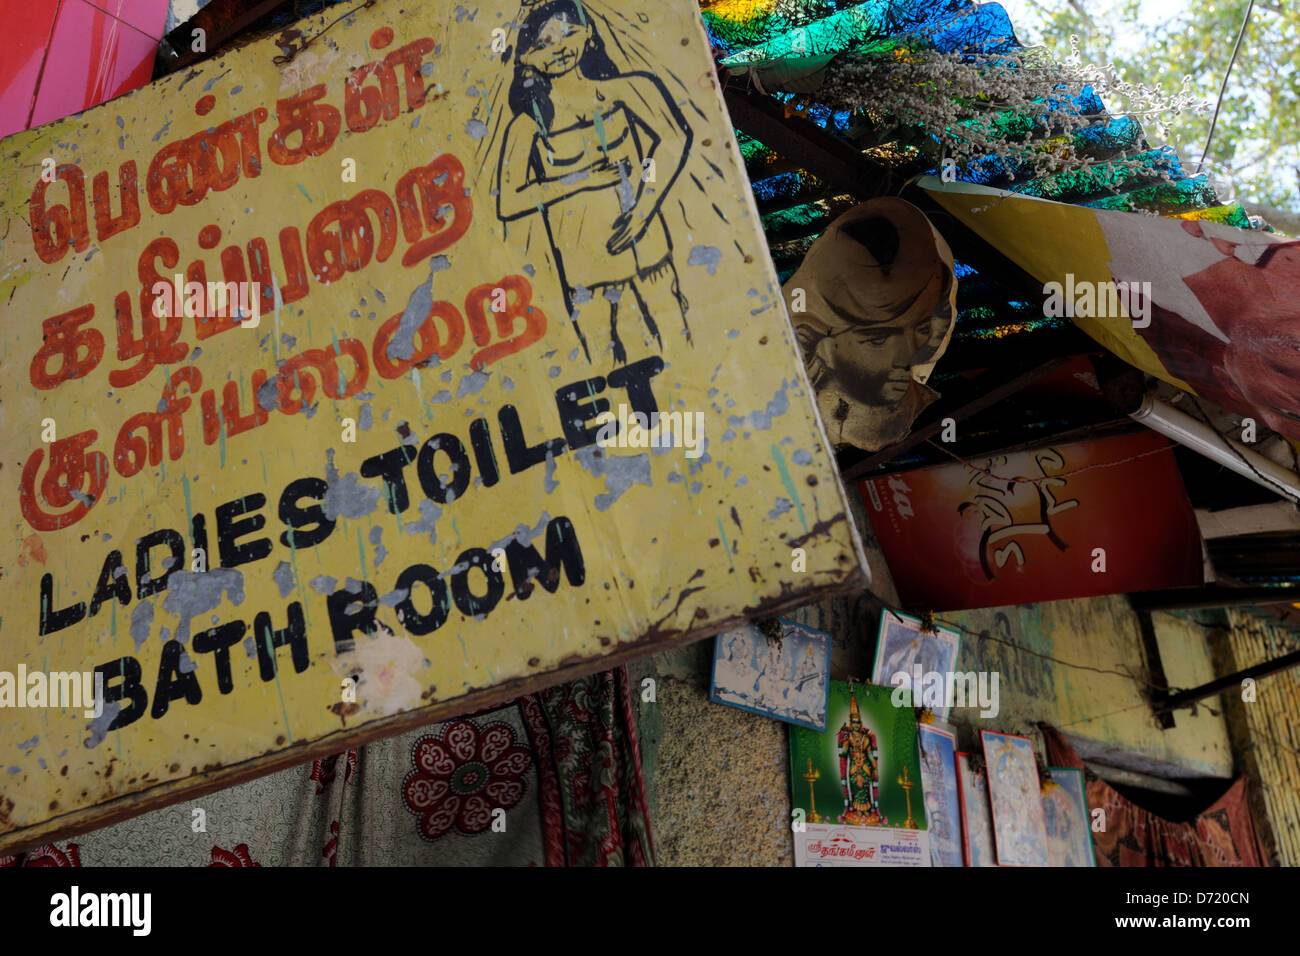 Public Ladies toilet sign in a small town in India. Stock Photo